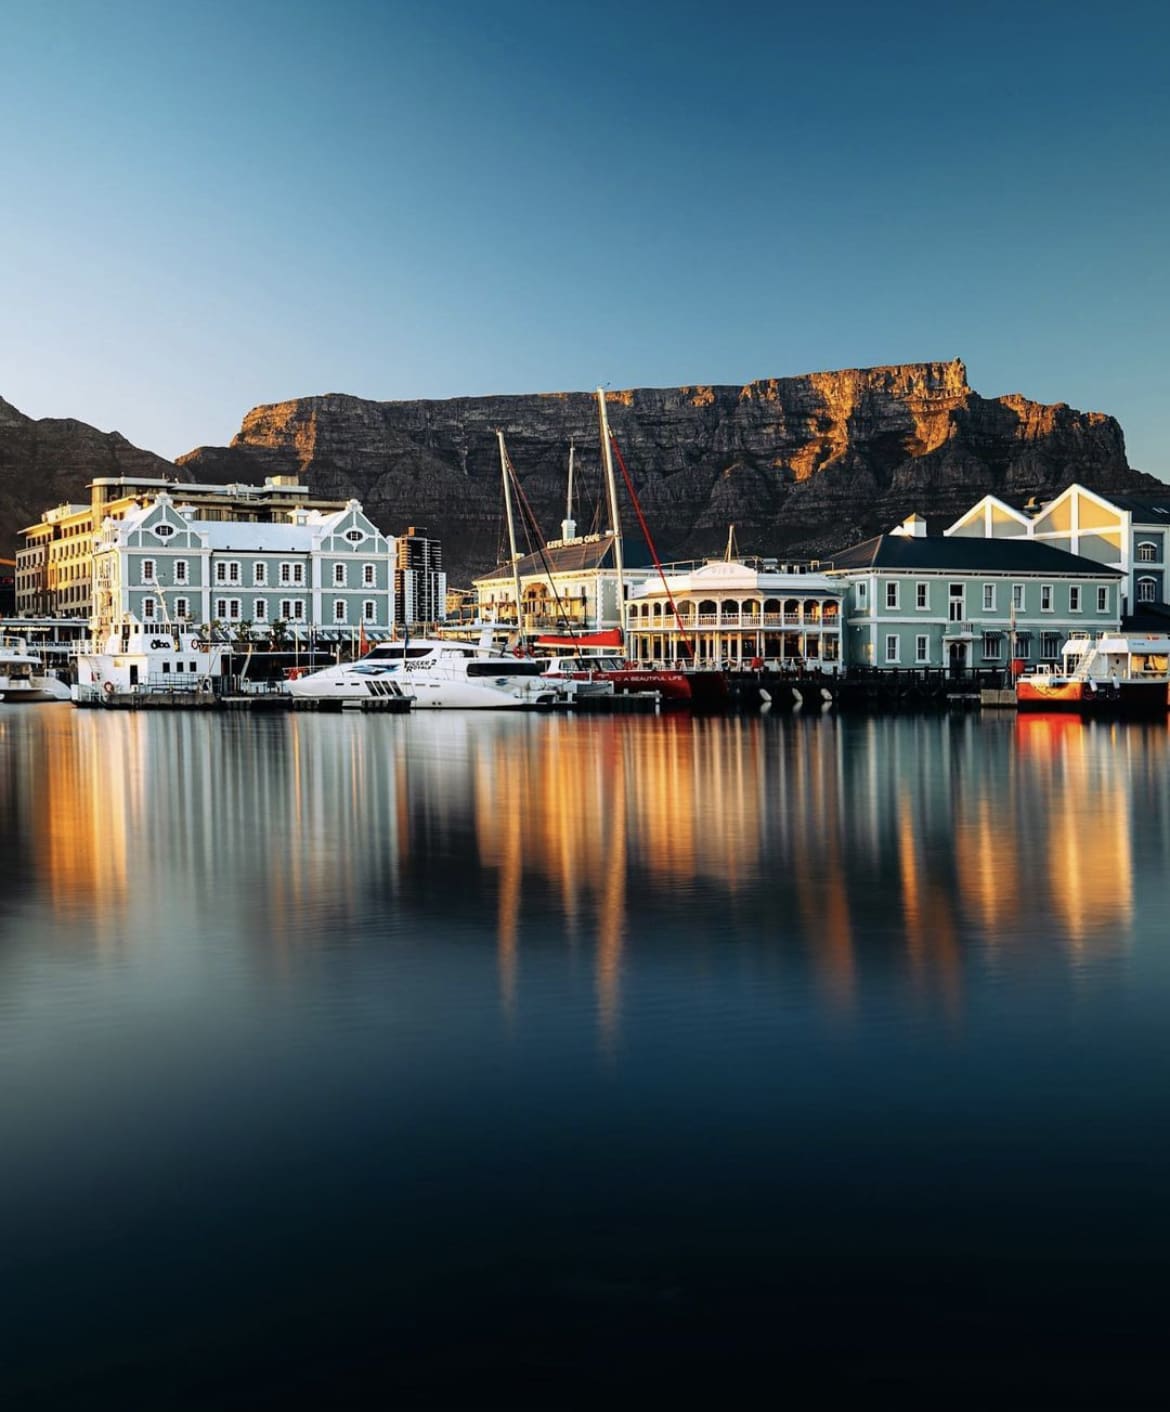 A still day at the V&A Waterfront